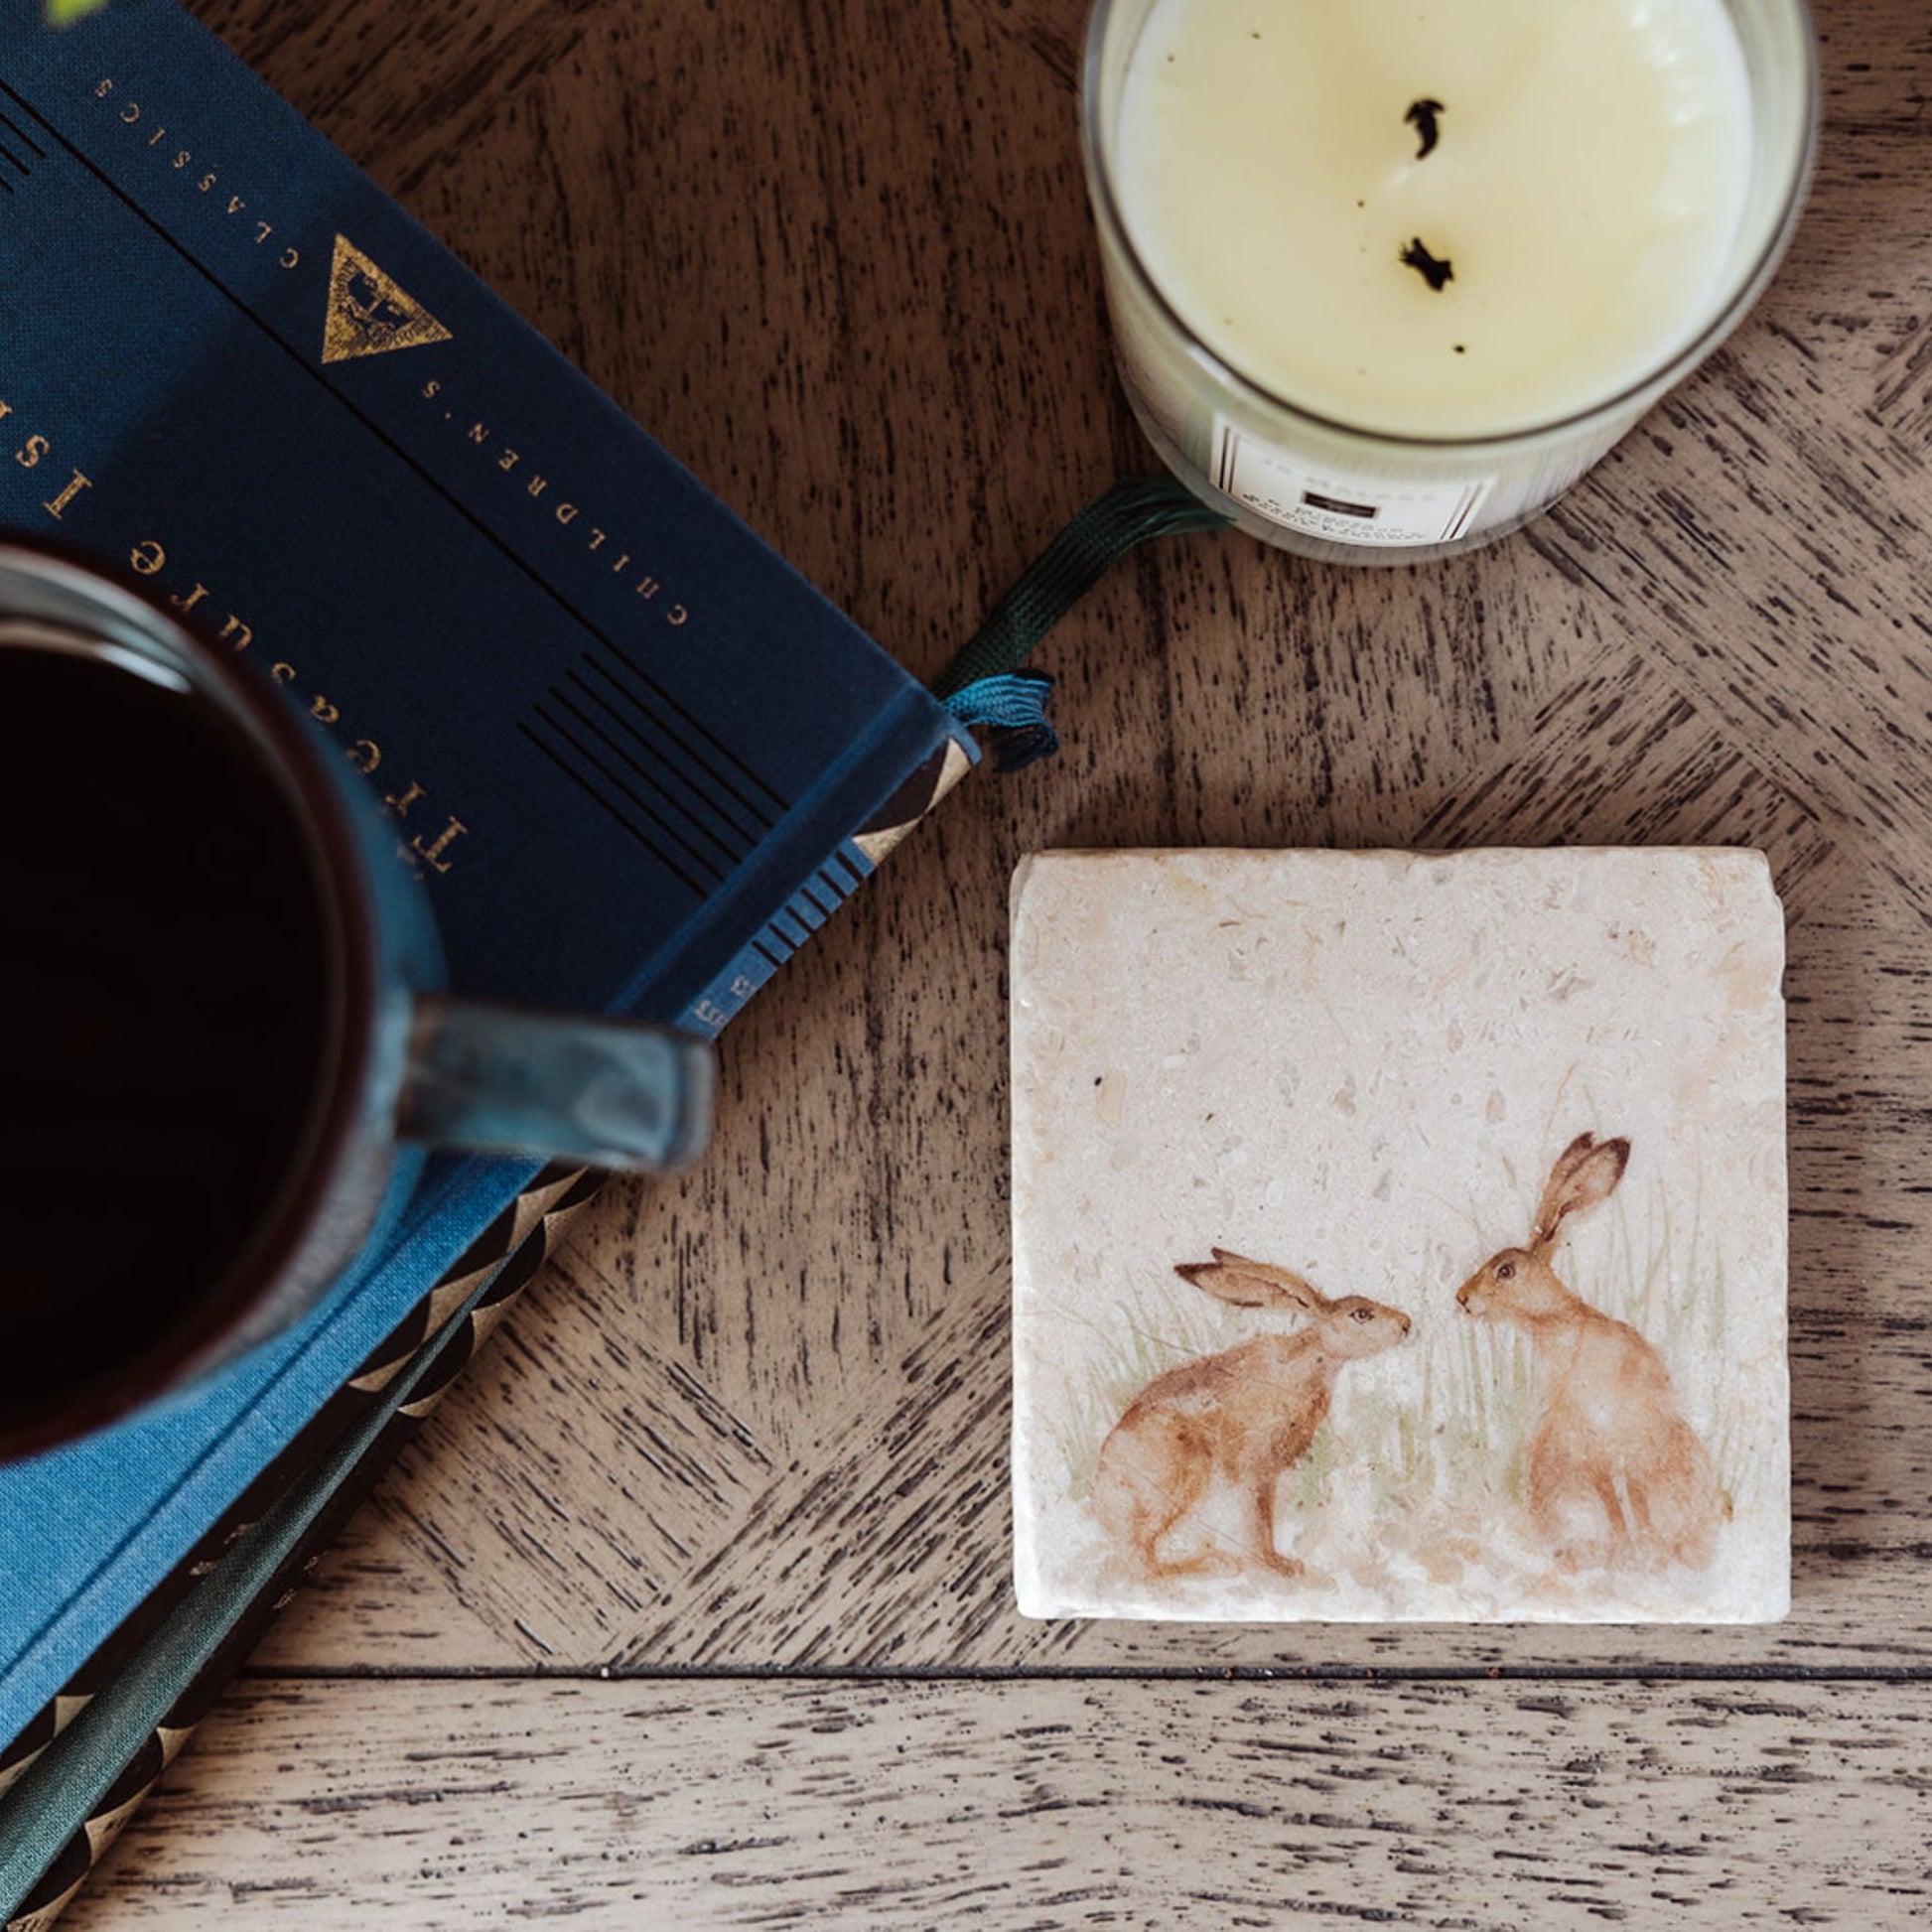 A square marble coaster featuring a watercolour design of two hares facing each other about to touch noses. The coaster is placed on a wooden table with a book, candle and cup of coffee.